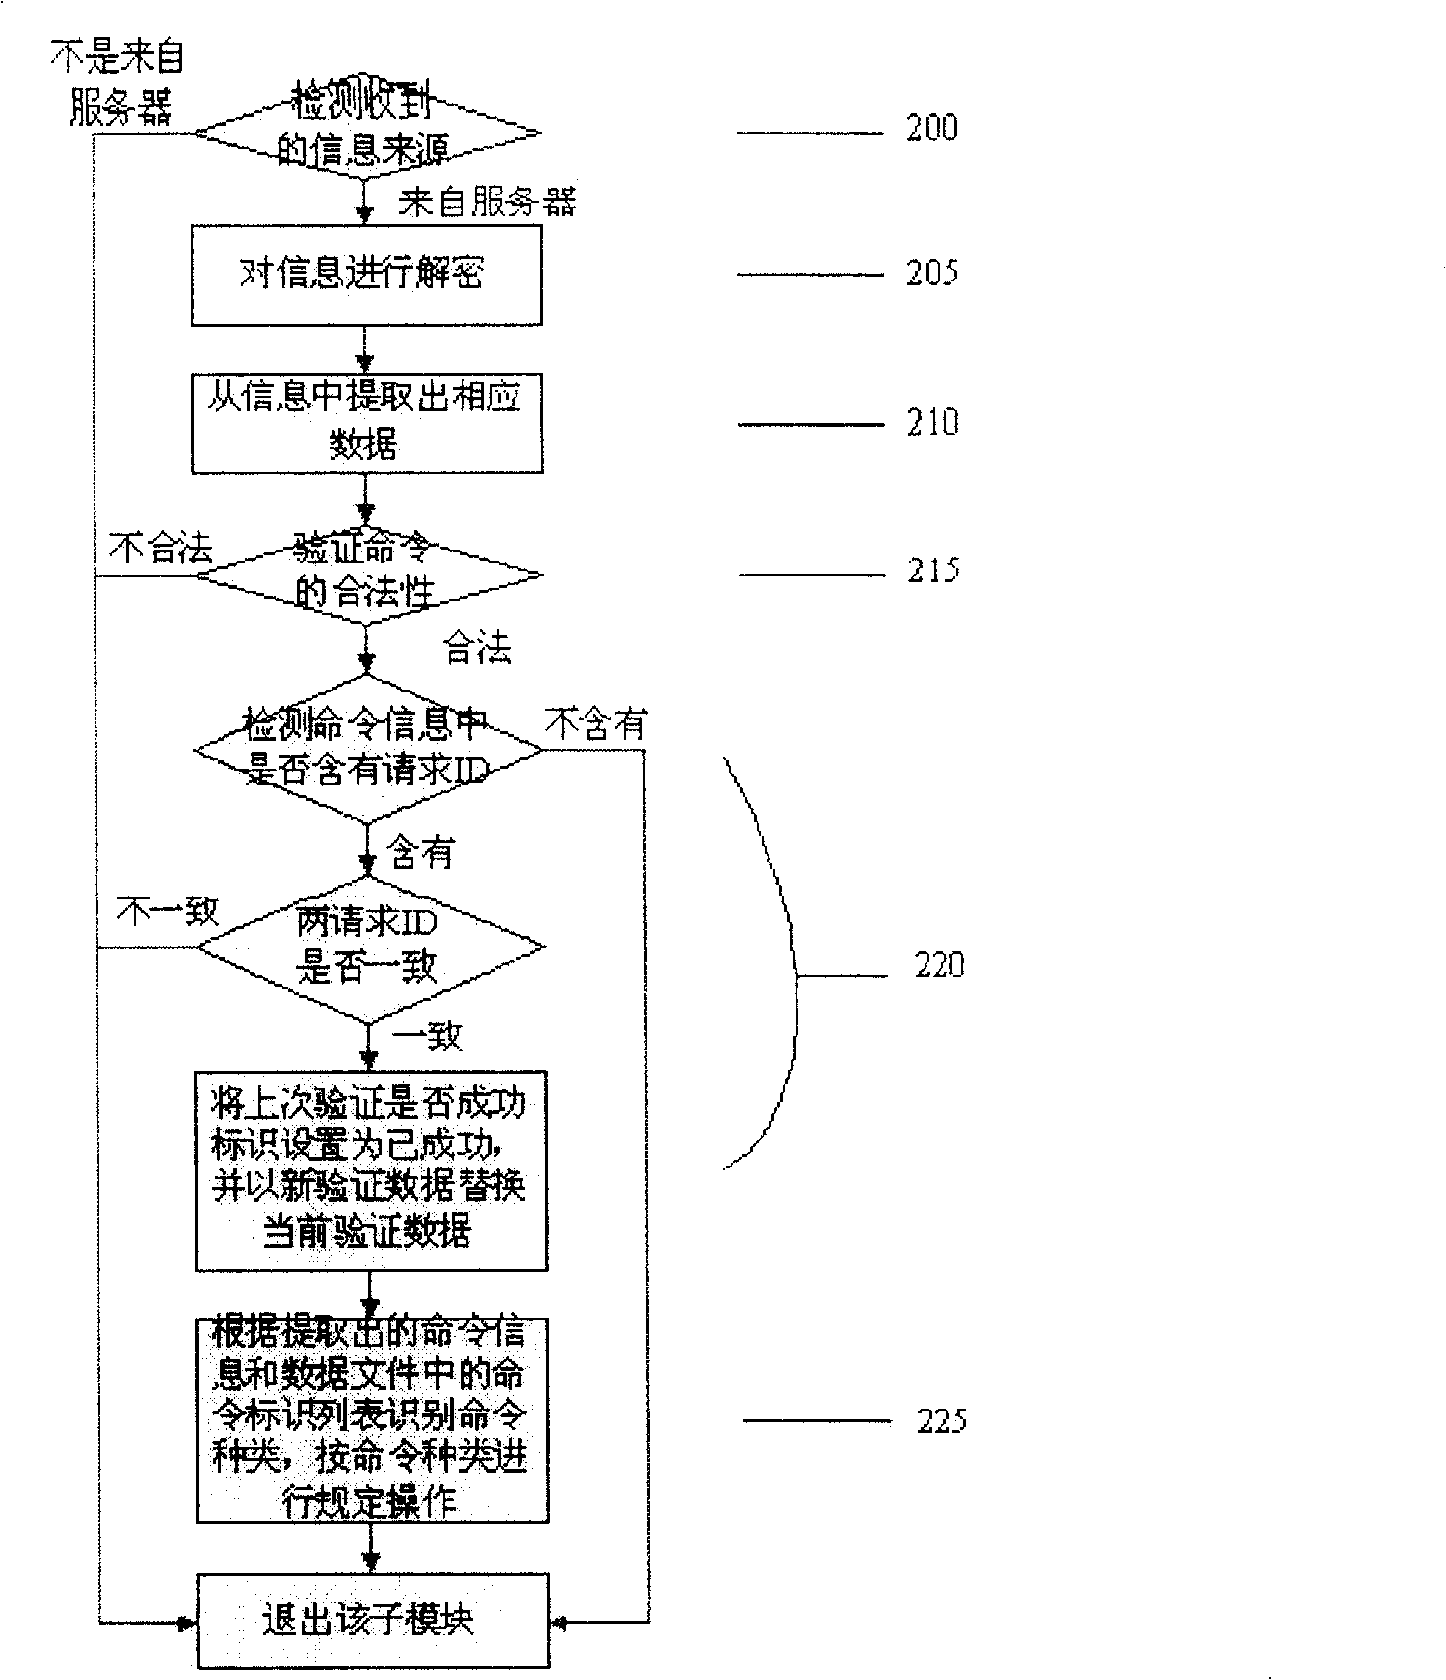 System and method for preventing software and hardware with communication condition / function from being embezzled